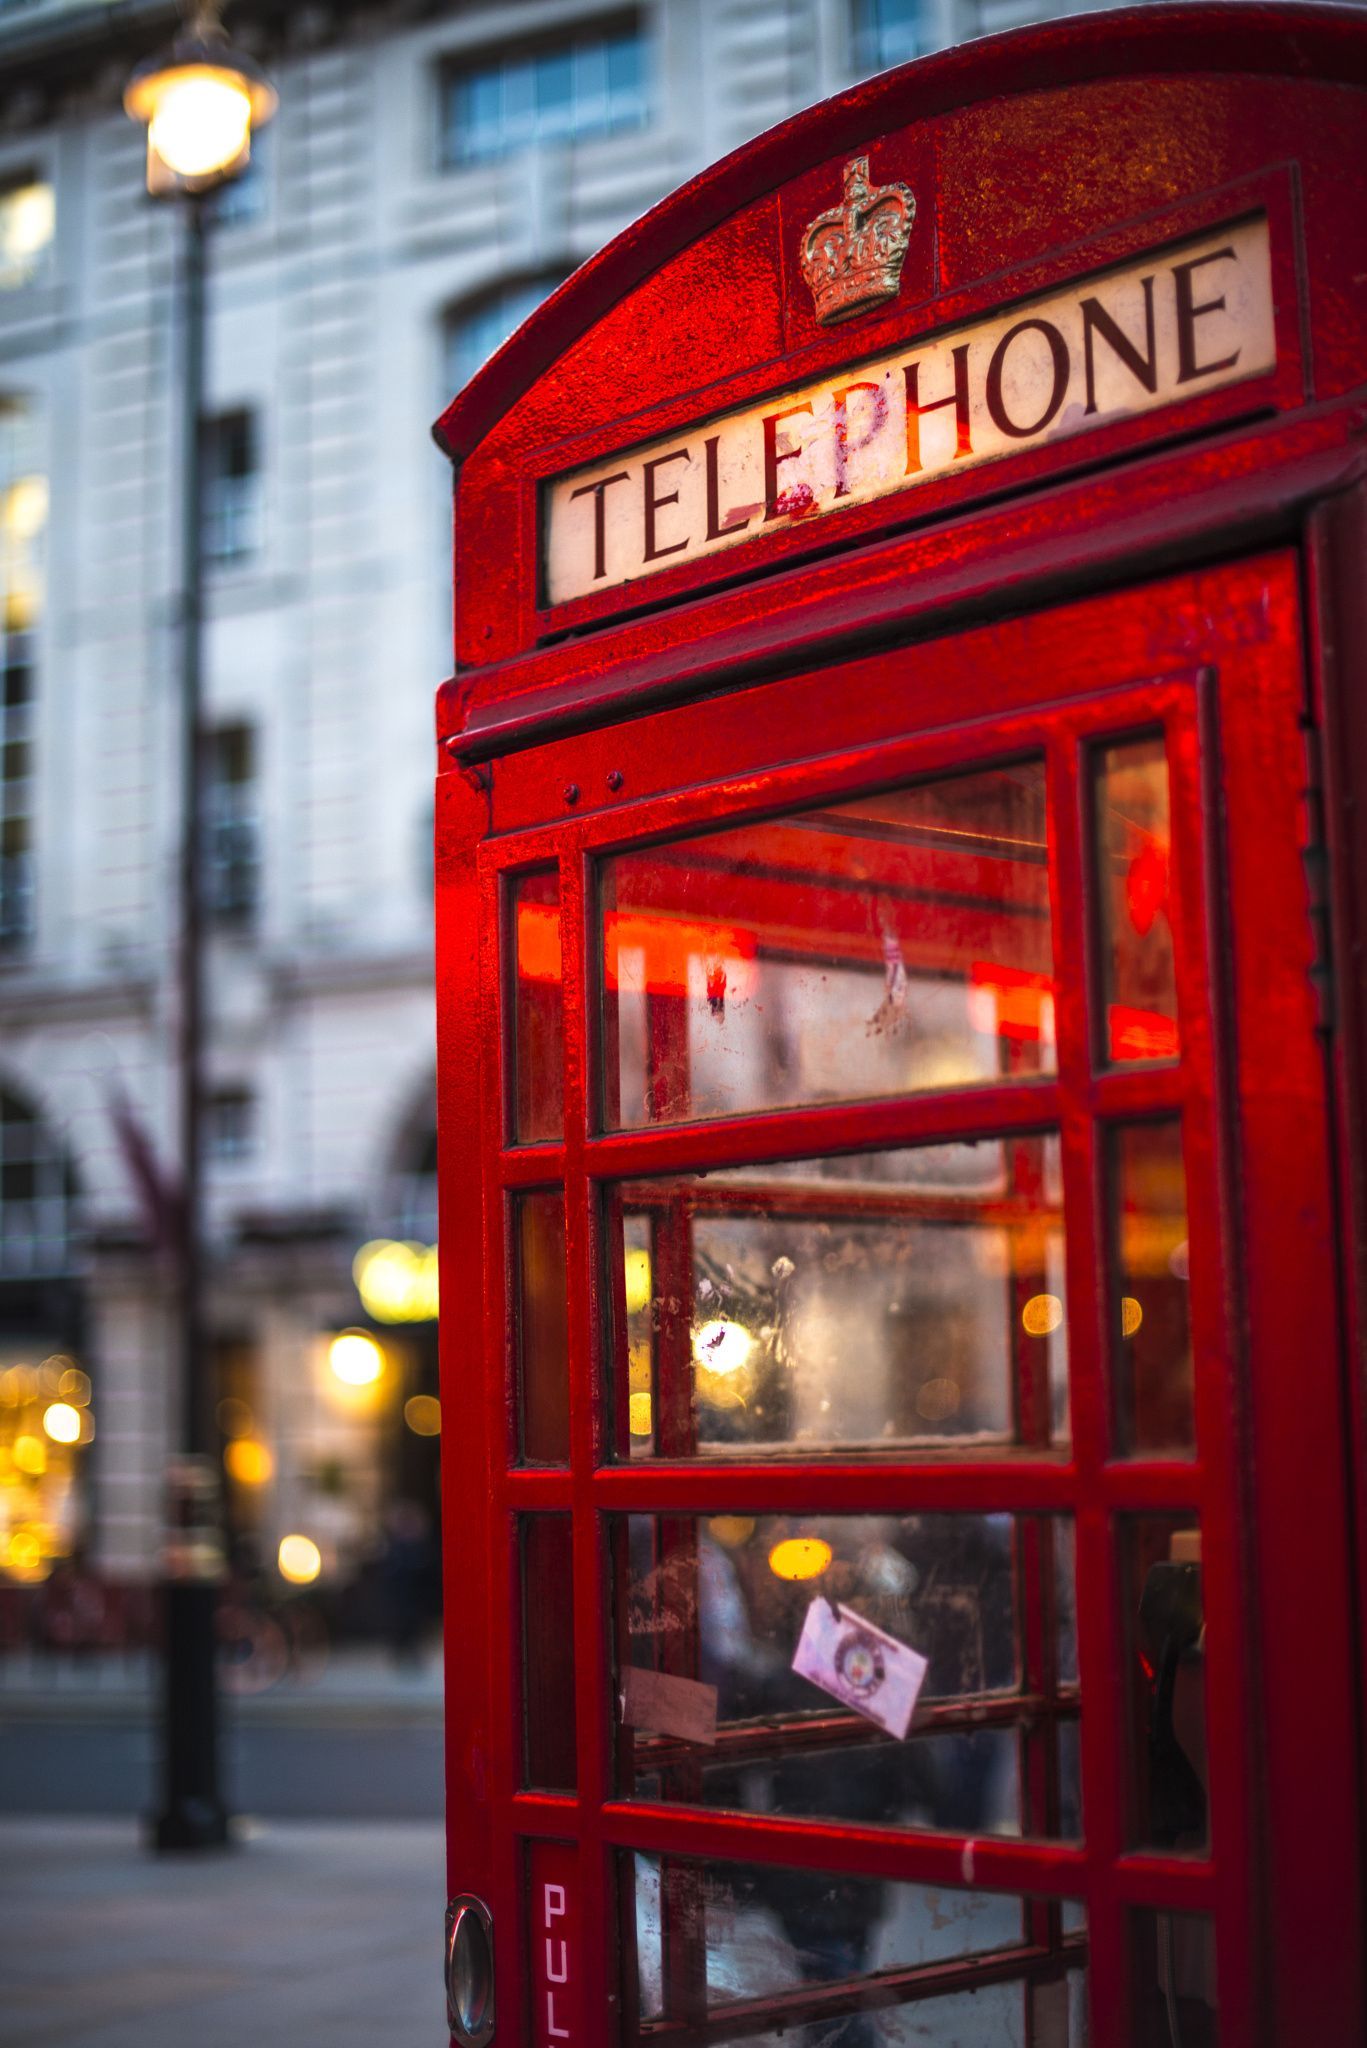 27345 Telephone Booth Images Stock Photos  Vectors  Shutterstock